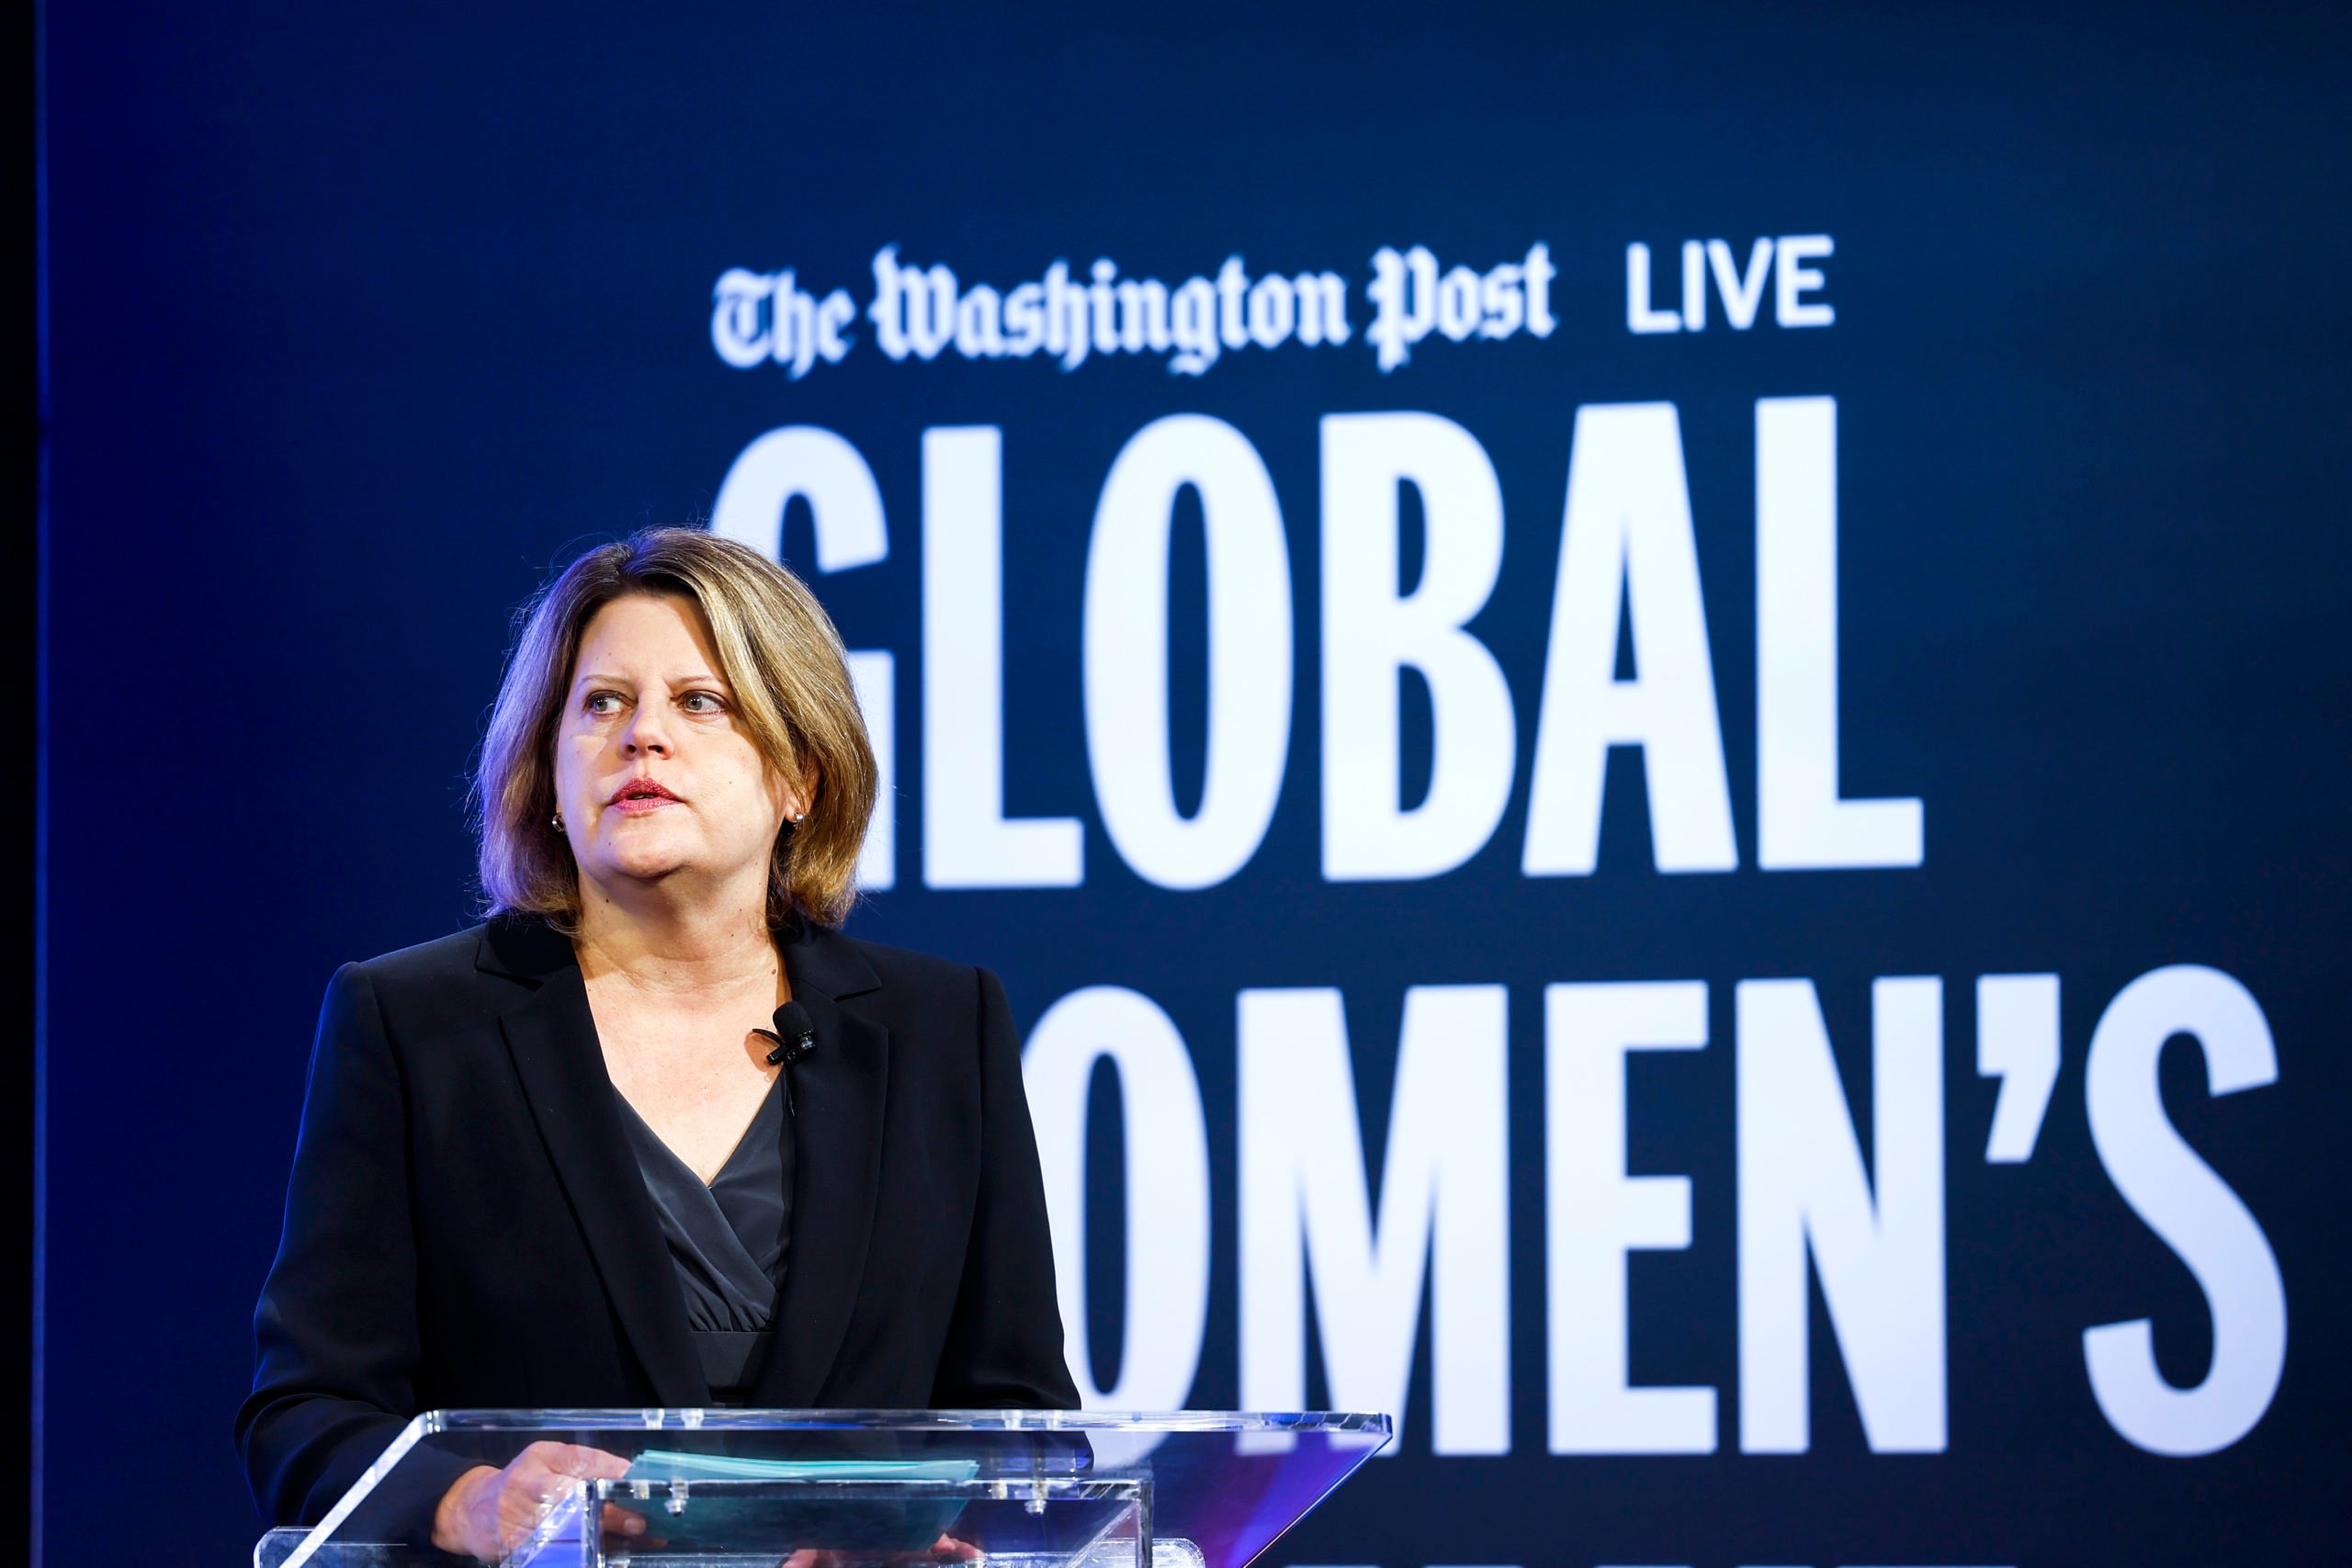 WASHINGTON, DC - NOVEMBER 15: Executive Editor of the Washington Post Sally Buzbee speaks during the Washington Post Global Women's Summit at the newspaper's headquarters on November 15, 2022 in Washington, DC. The inaugural summit featured a collection of speakers ranging from activists to politicians gathered to discuss global issues through the perspectives of women. Anna Moneymaker/Getty Images